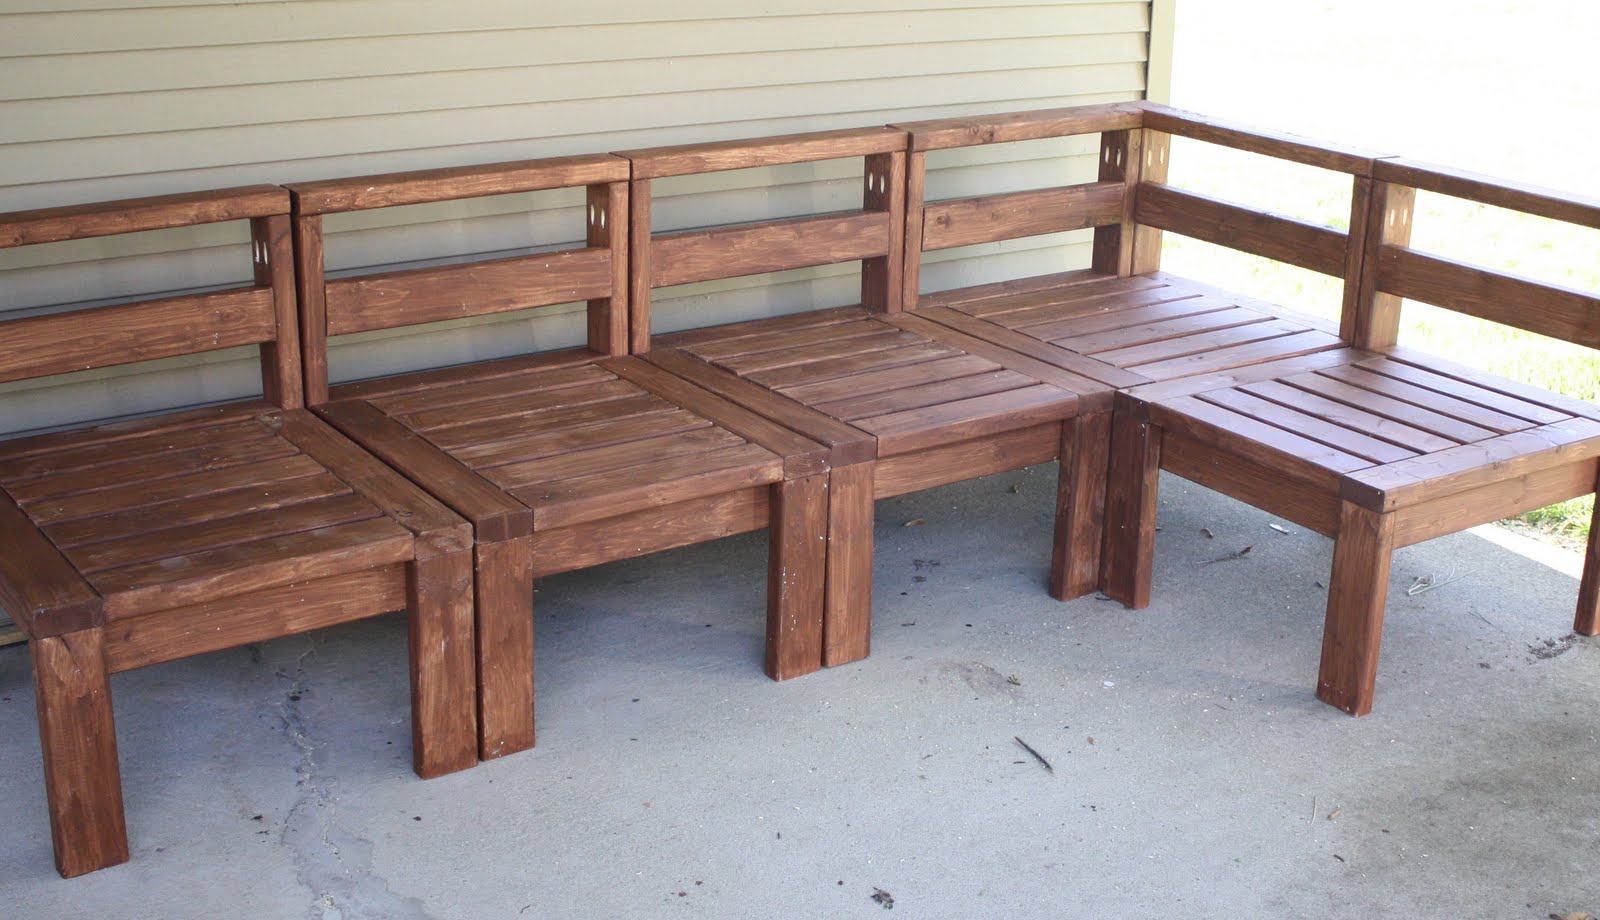 More Like Home: 2x4 Outdoor Sectional